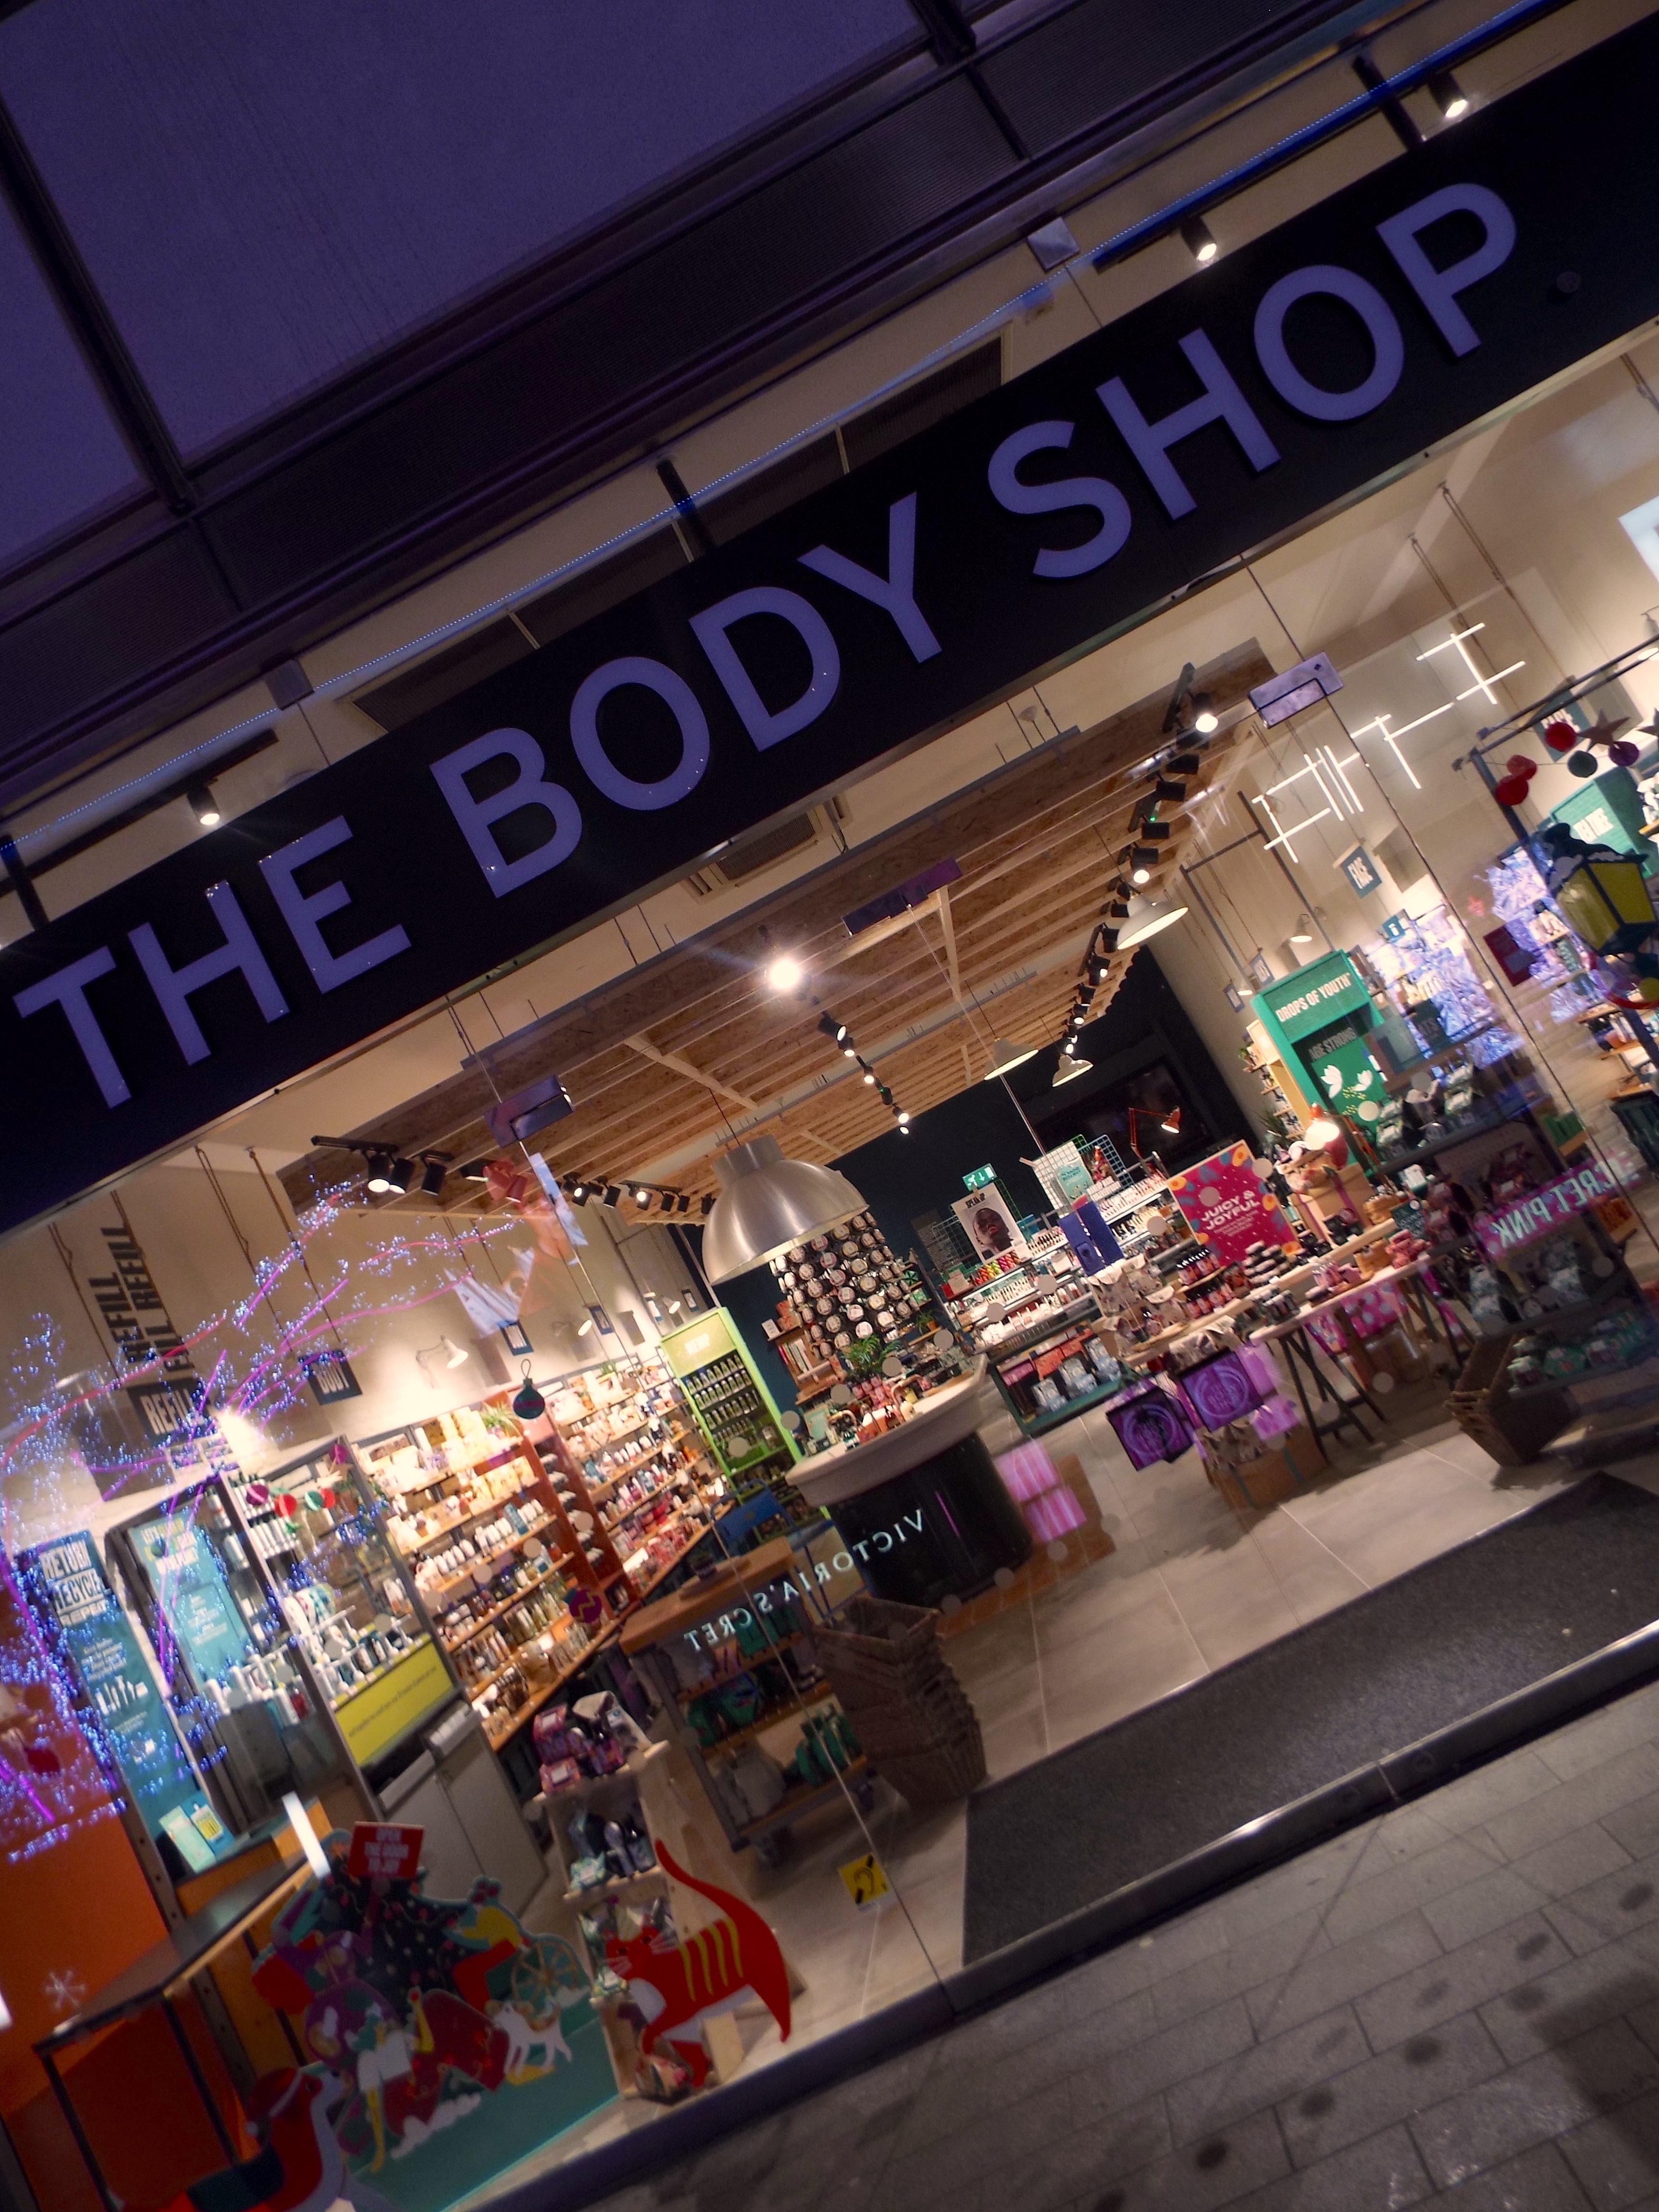 The Body Shop Liverpool One lit up on a dark Christmas evening with the surrounding Christmas lights reflecting in the window and colourful displays inside.